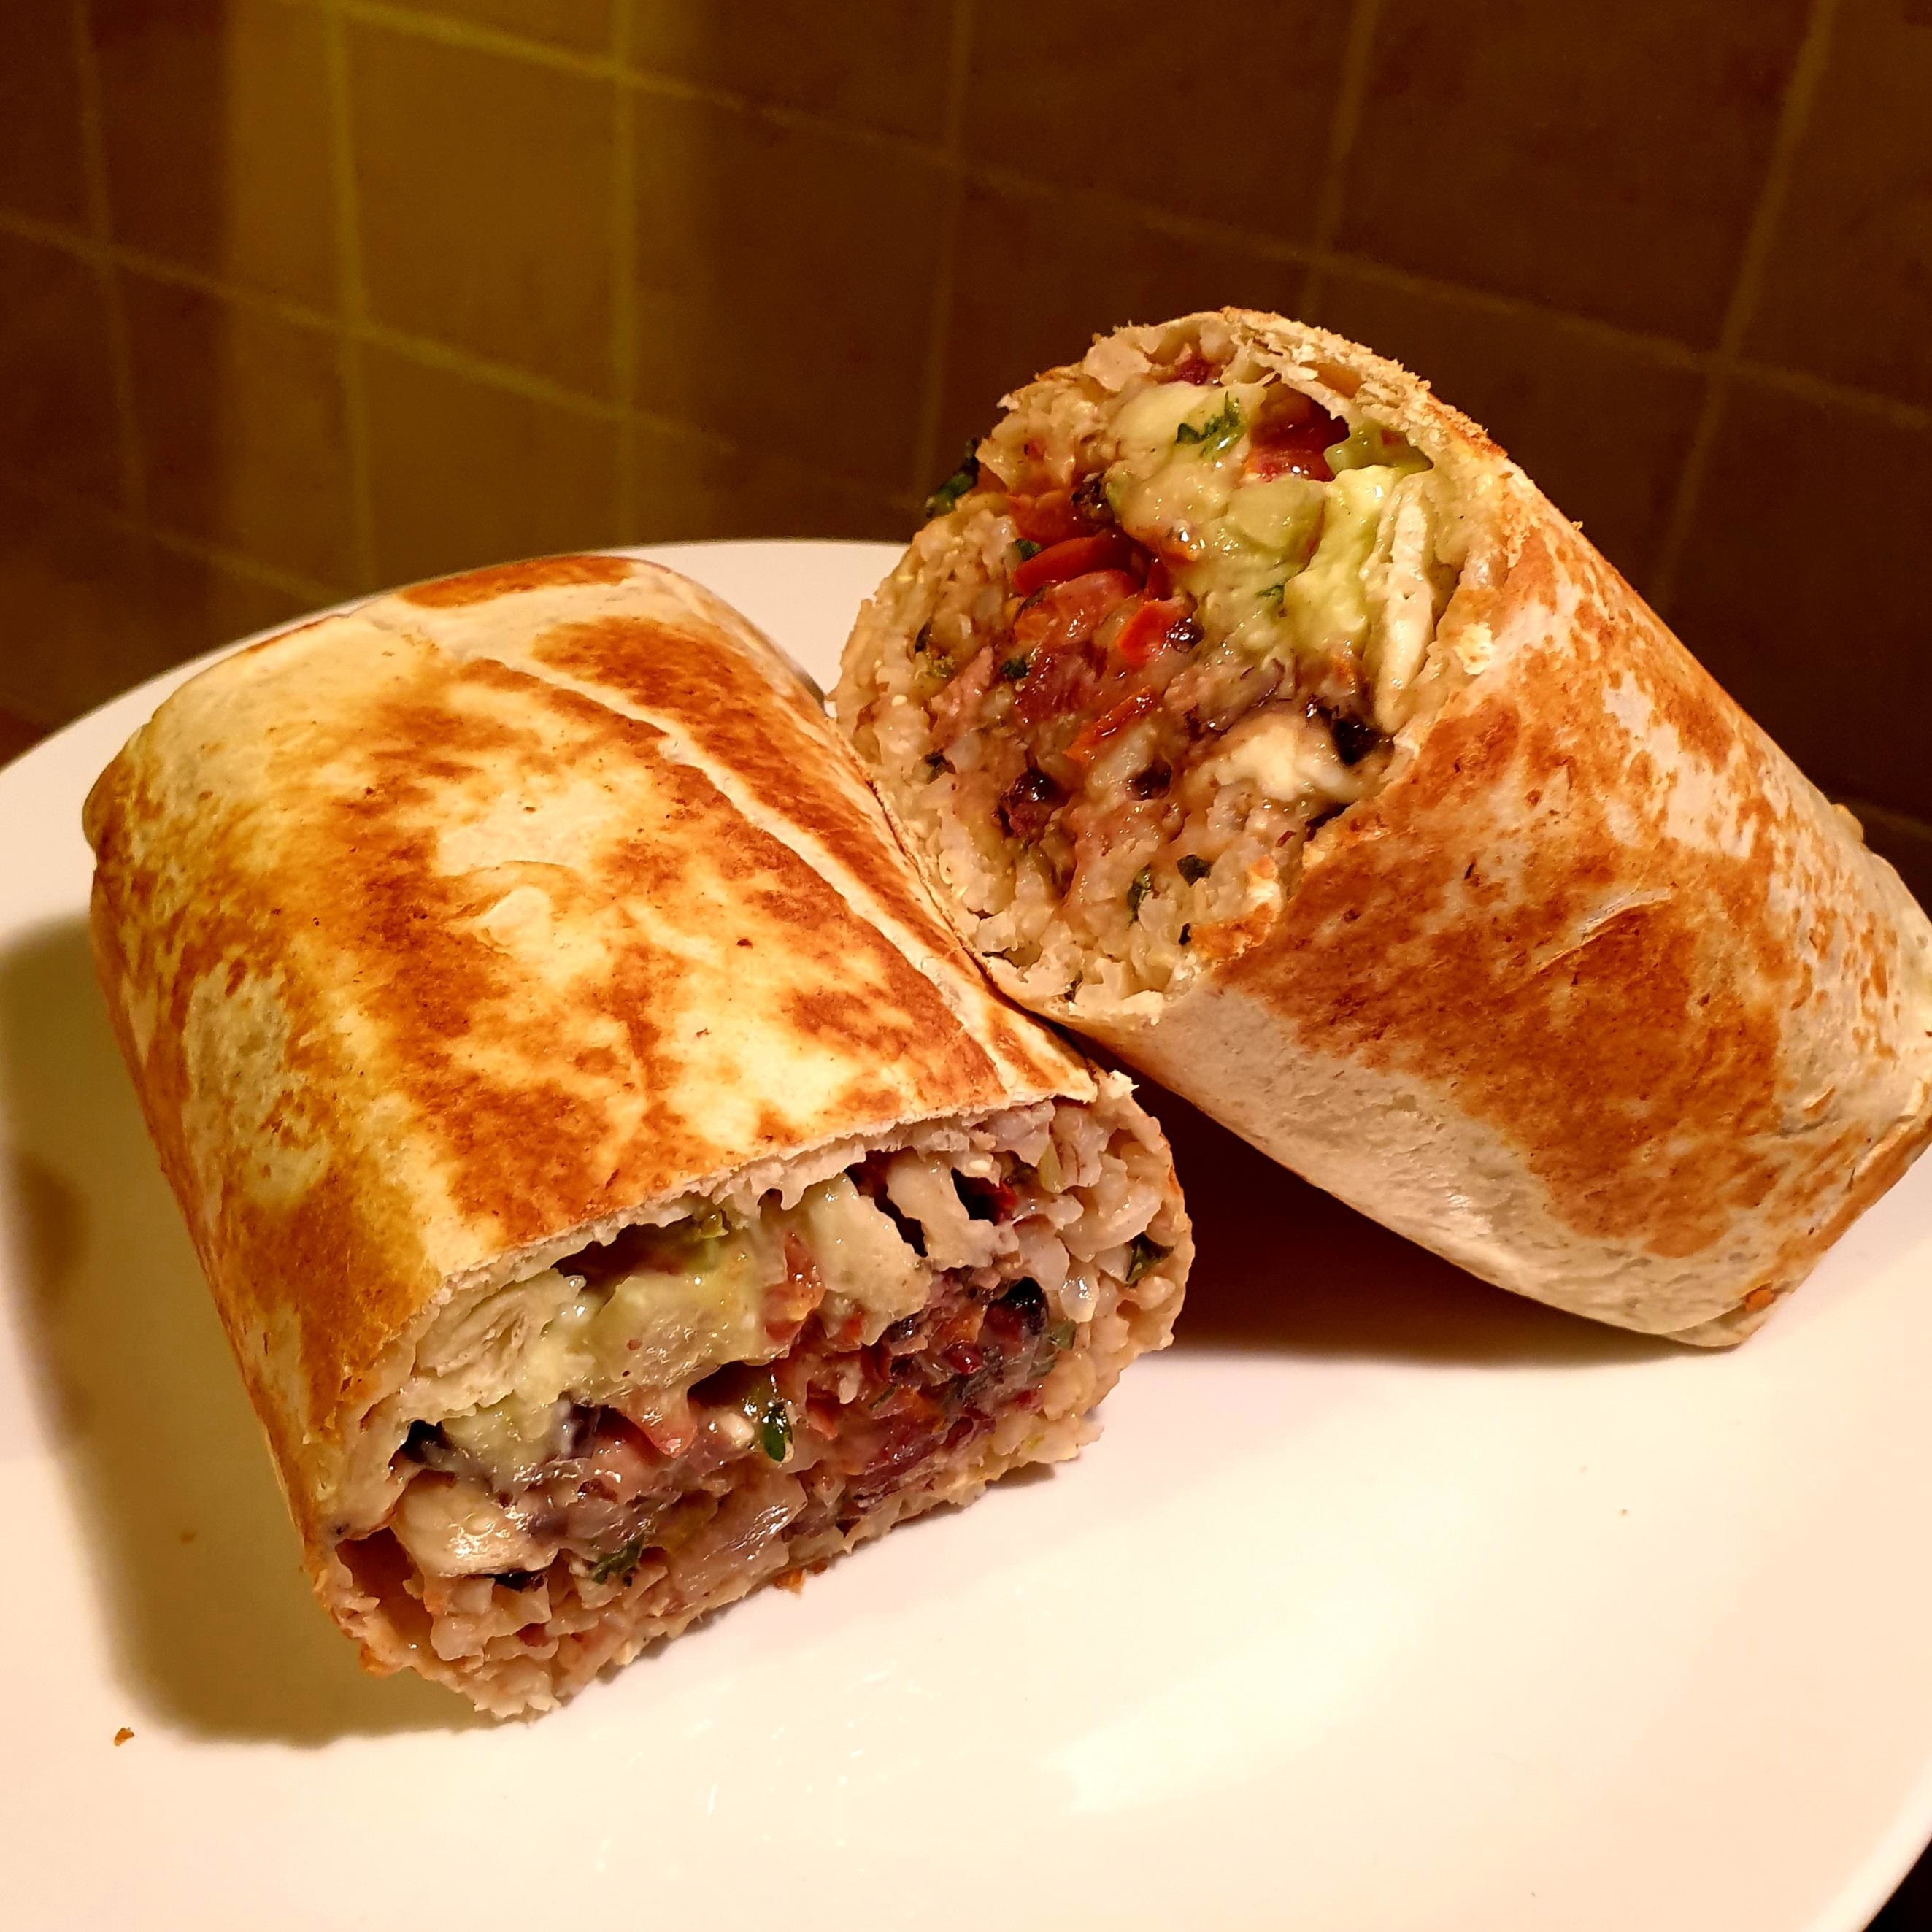 A burrito cut in half, revealing rice, beans, and avocado